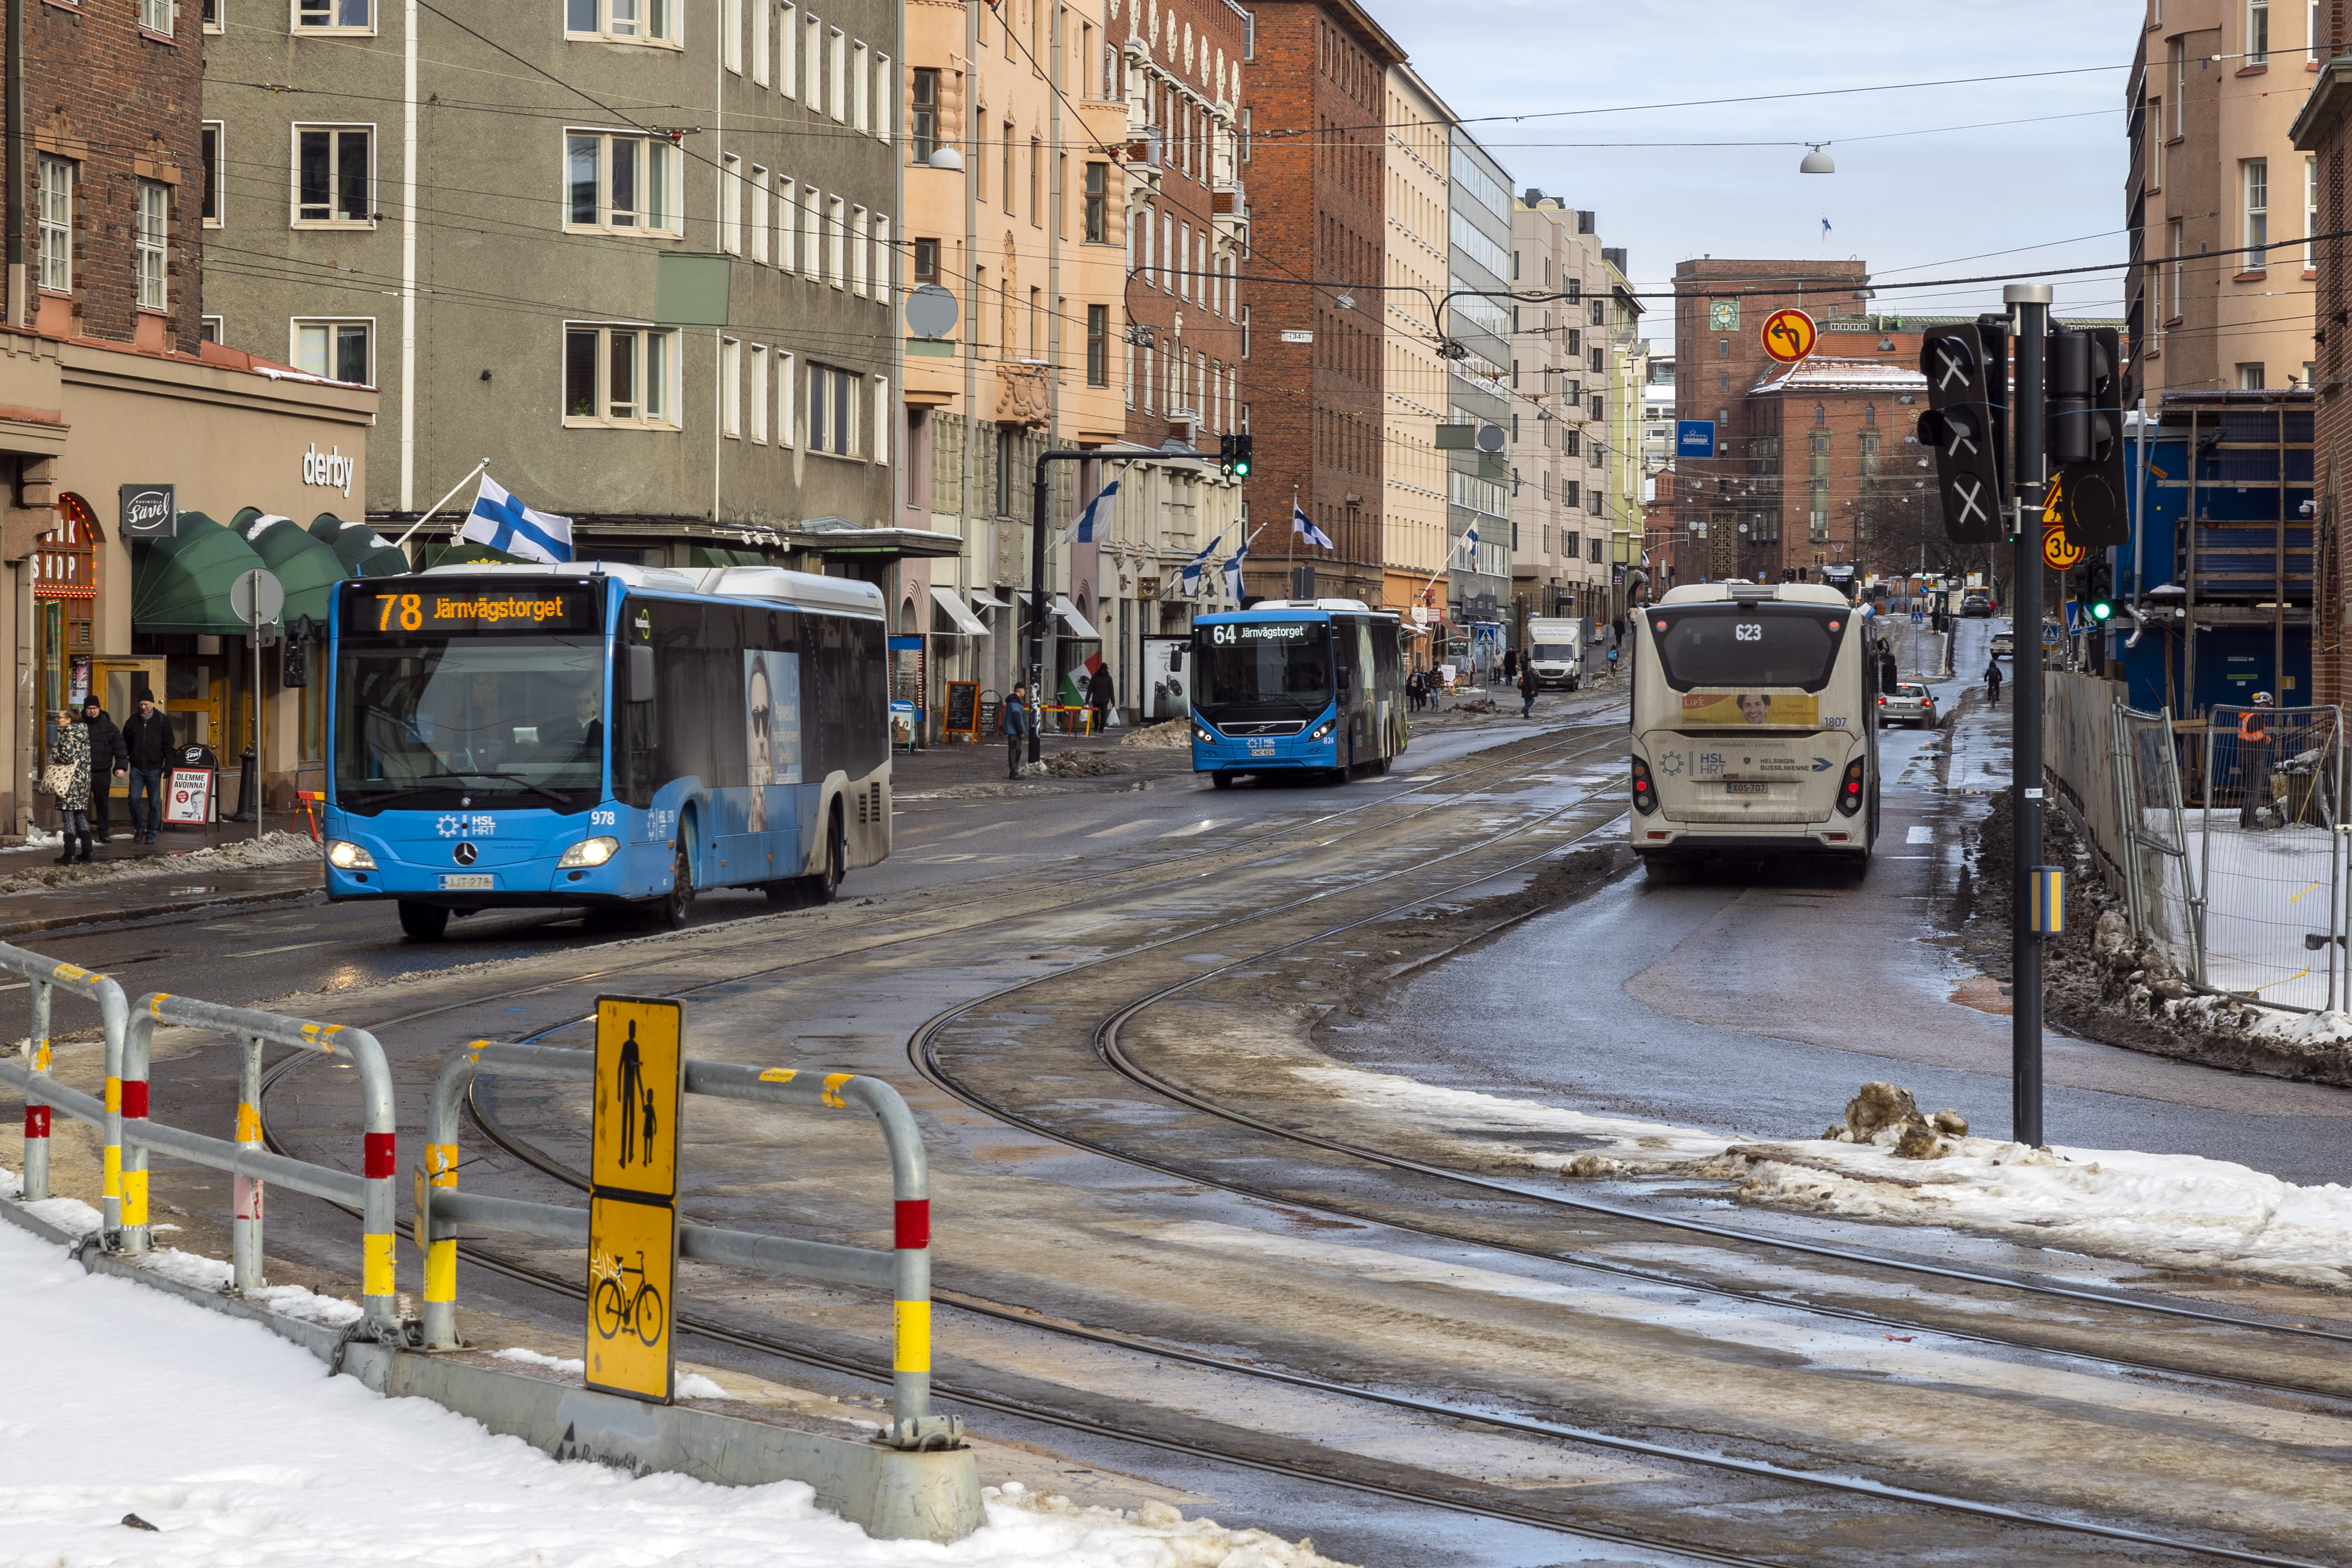 See which bus lines are affected by the Finnish bus drivers’ strike